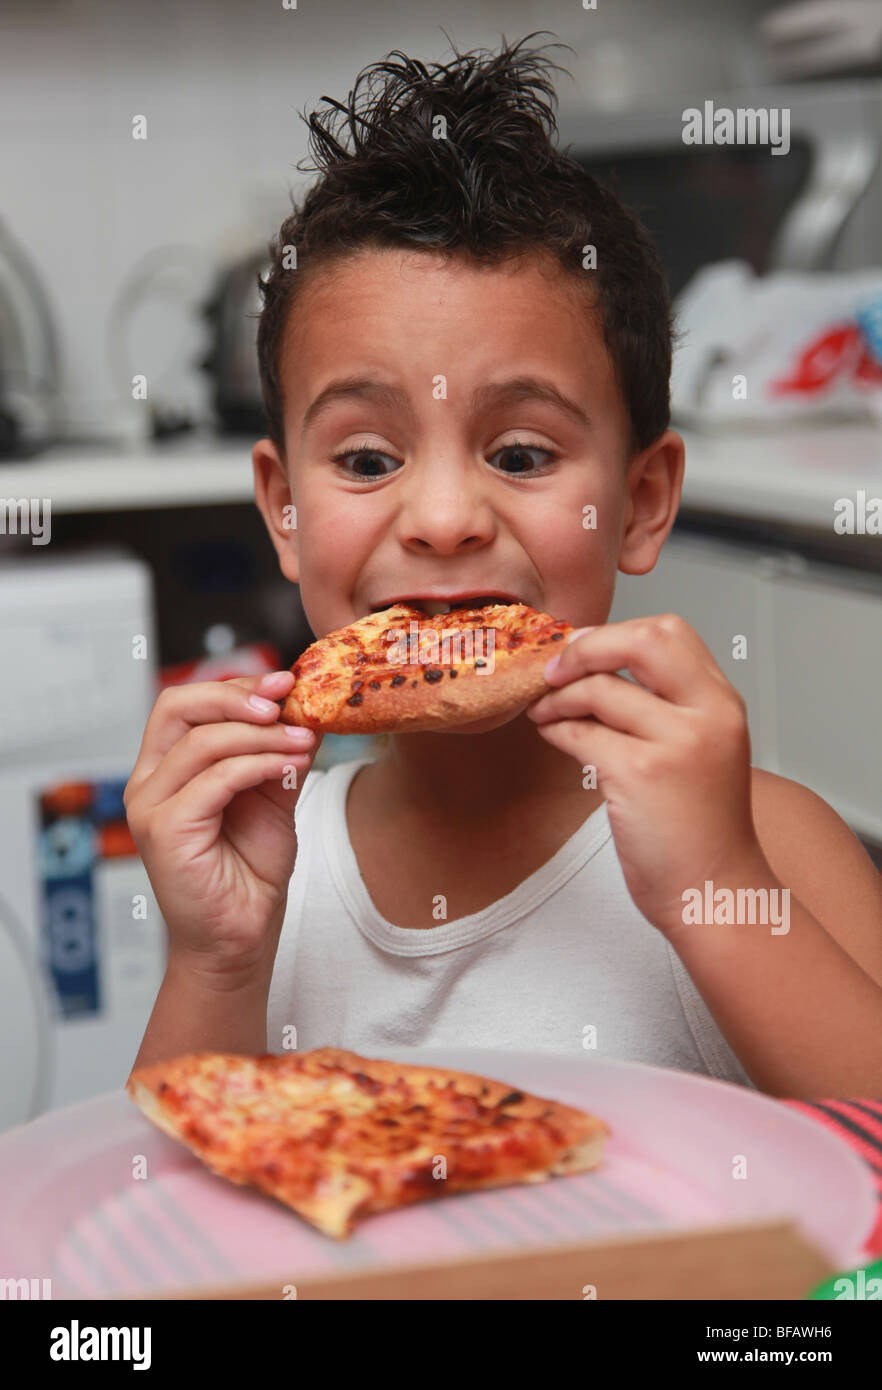 6 year old boy eating pizza Stock Photo